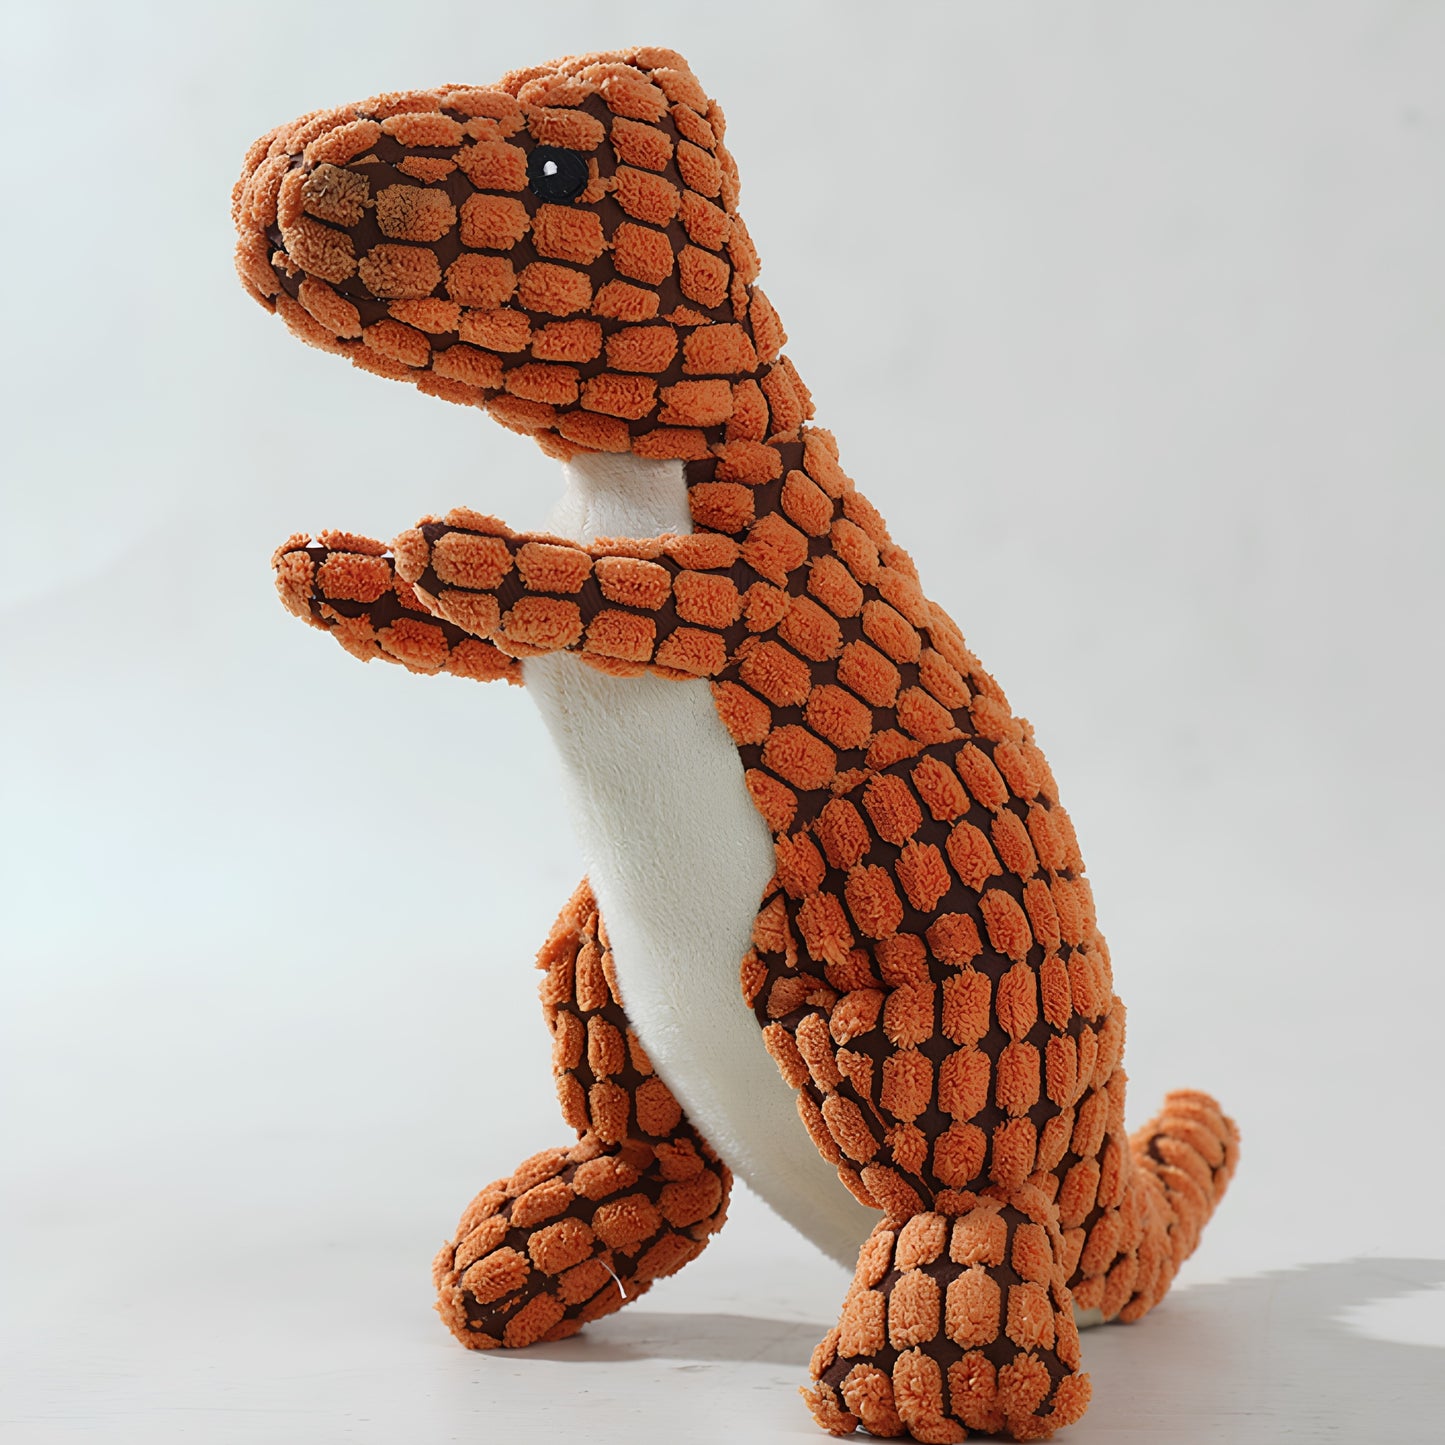 Dinobite - The plush toy for your dog